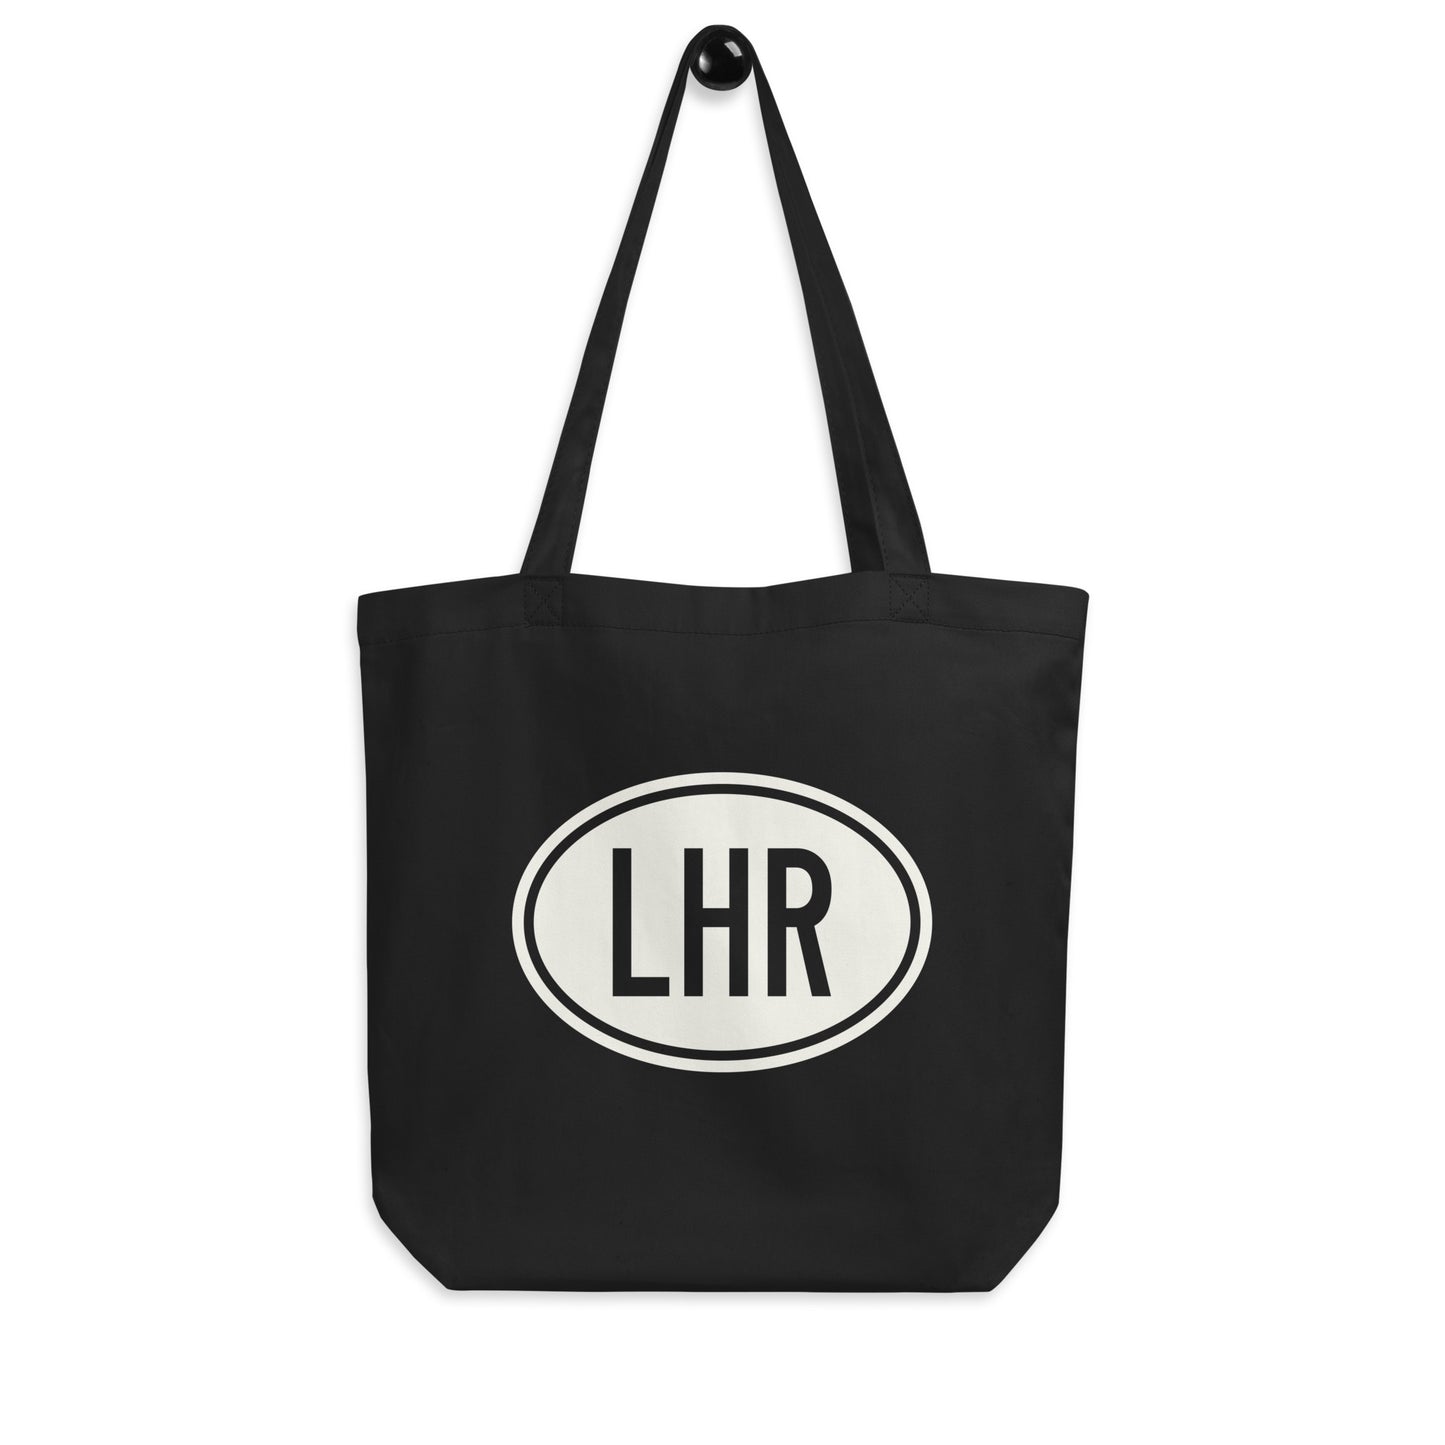 Unique Travel Gift Organic Tote - White Oval • LHR London • YHM Designs - Image 04